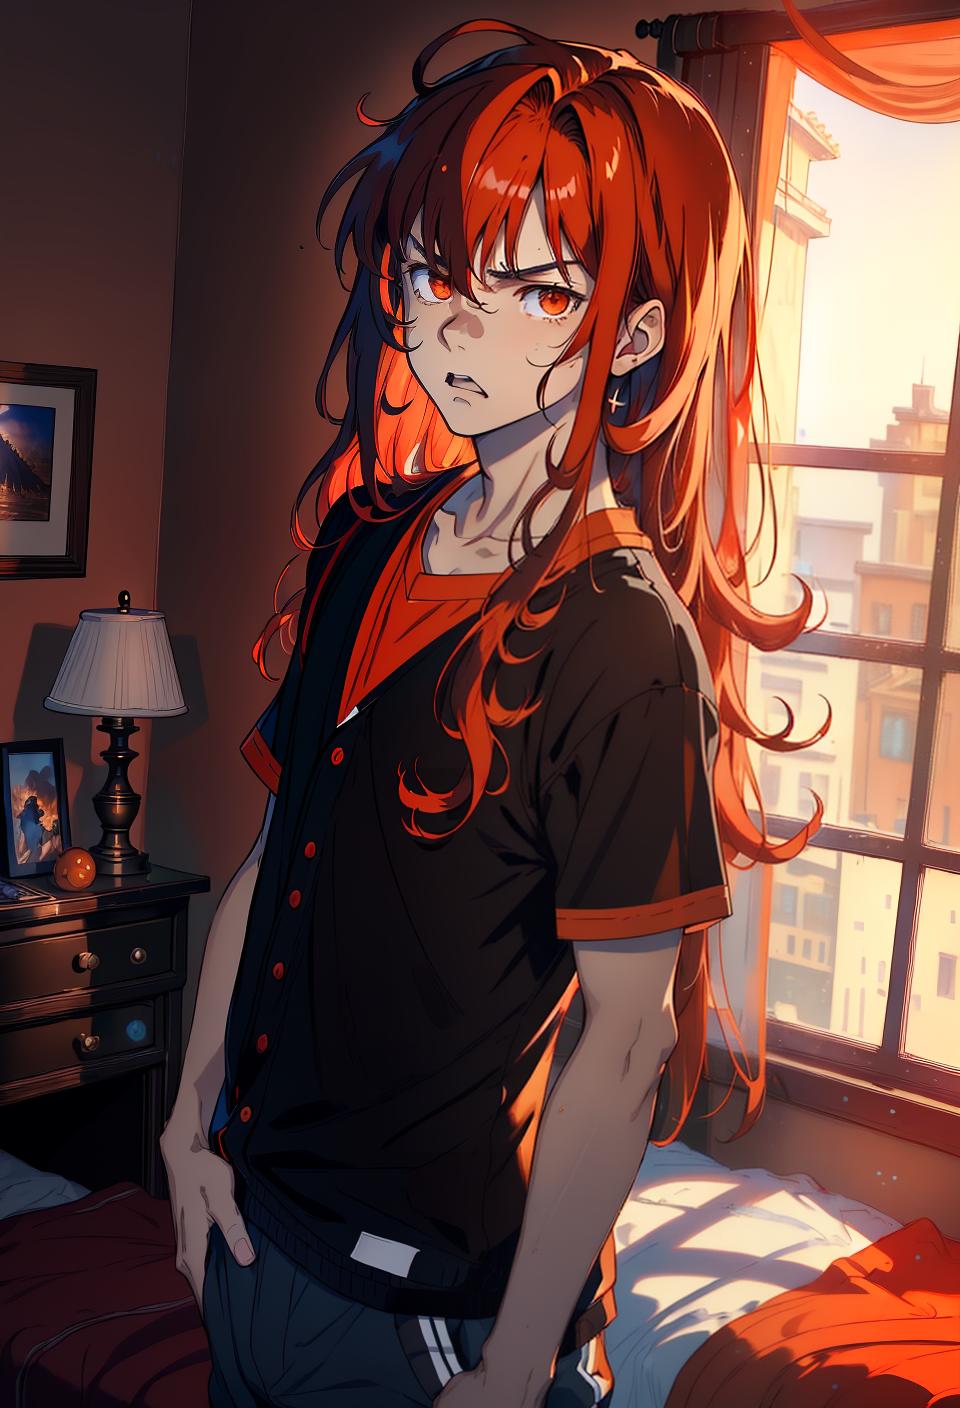  ((trending, highres, masterpiece, cinematic shot)), 1boy, young, male casual wear, bedroom scene, very long curly red hair, asymmetrical bangs,  orange eyes, handy personality, angry expression, tanned skin, epic, limber